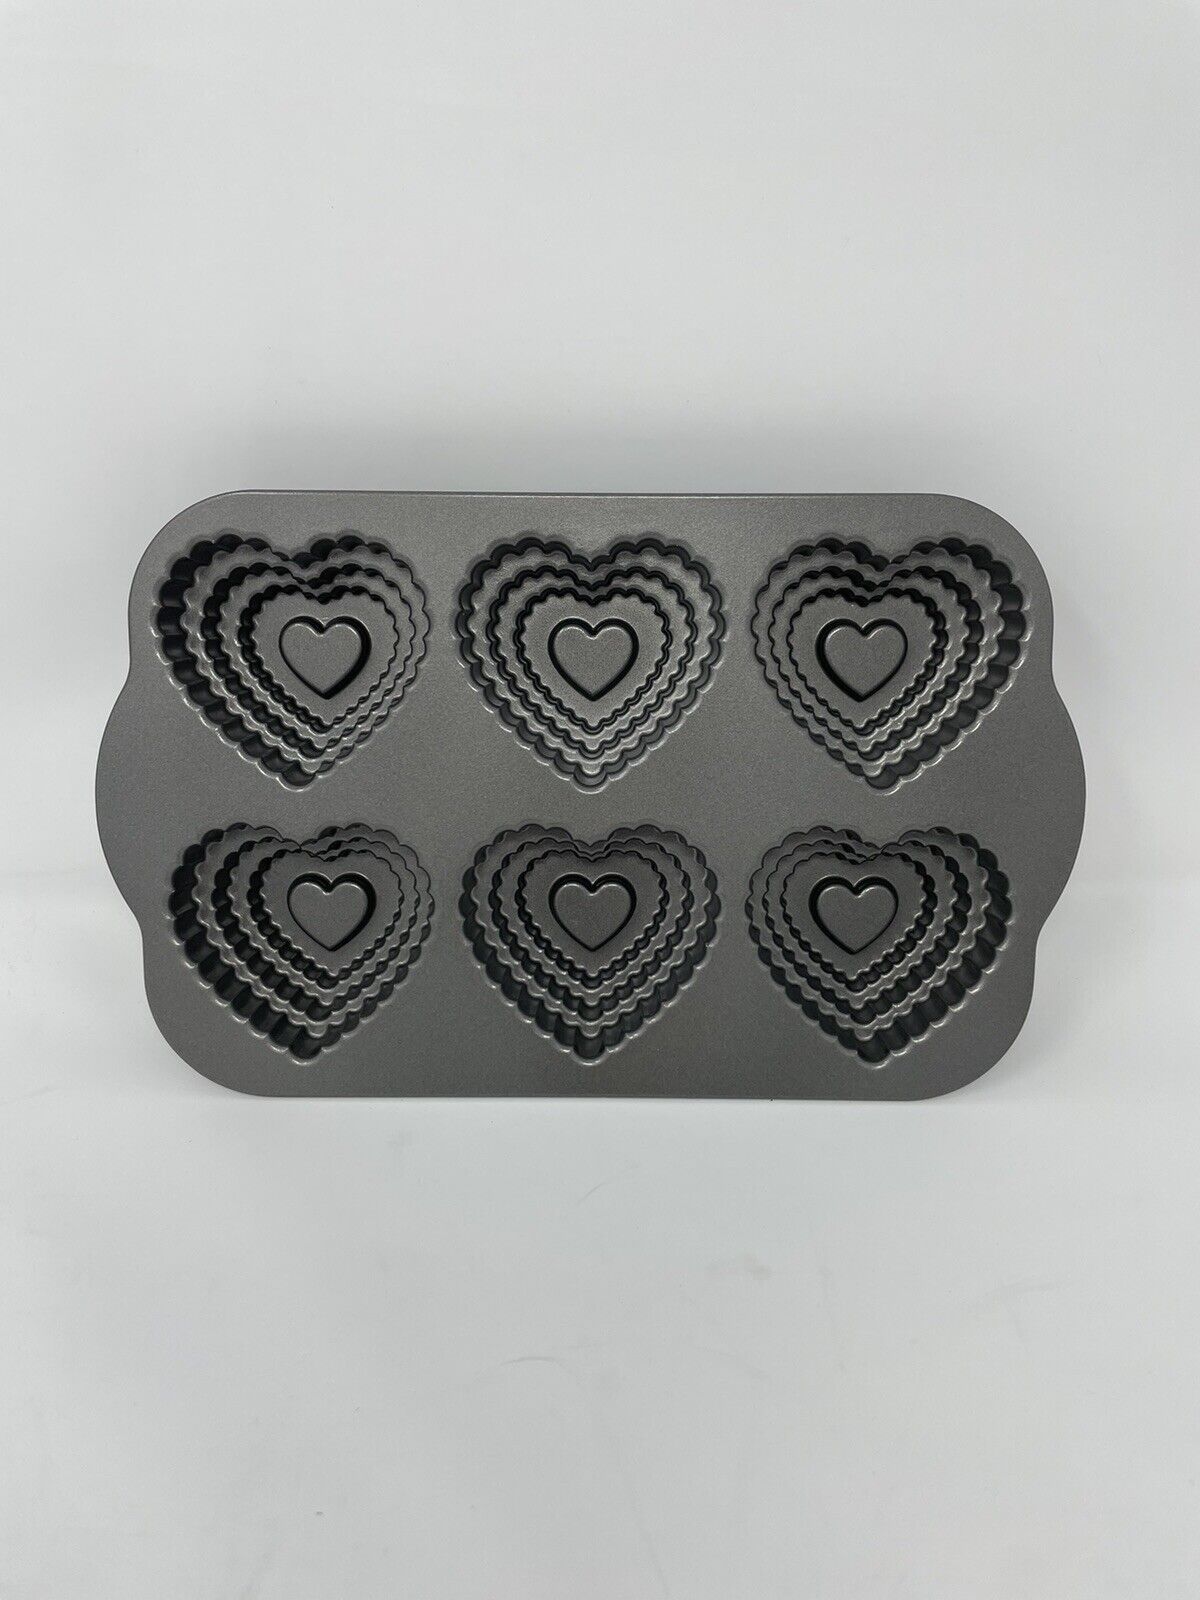 NEW Nordic Ware Tiered Heart Cakelet Pan, makes 6 sm cakes or lg cupcakes 